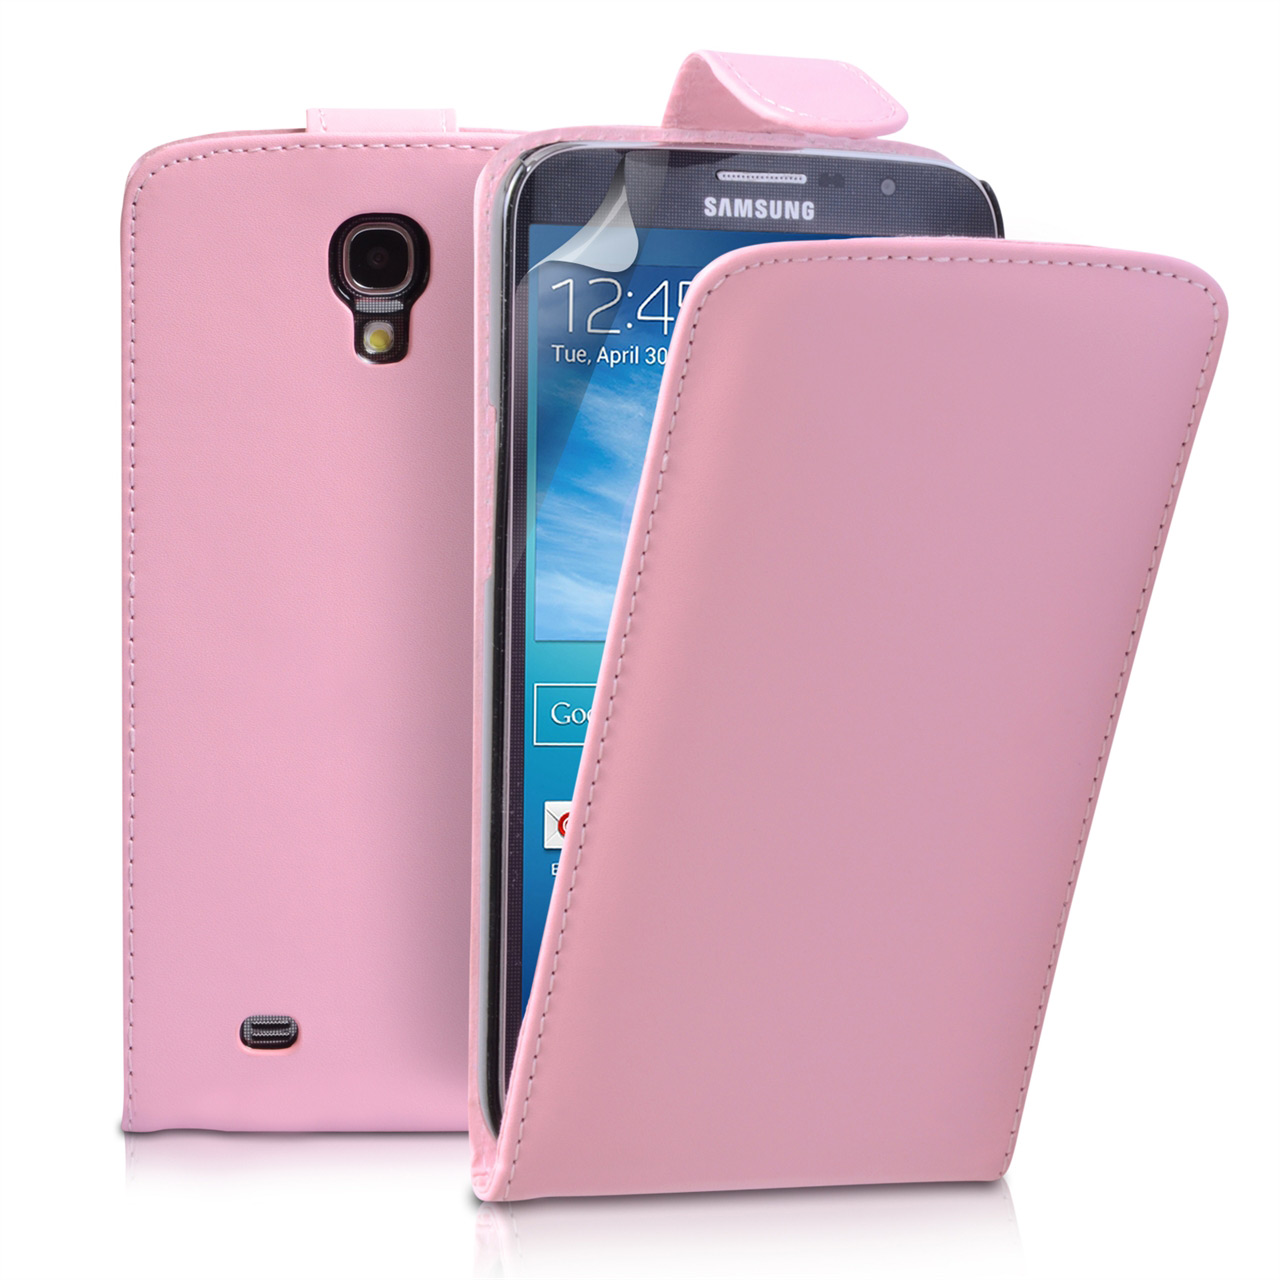 YouSave Samsung Galaxy Mega 6.3 Leather Effect Flip Case - Baby Pink